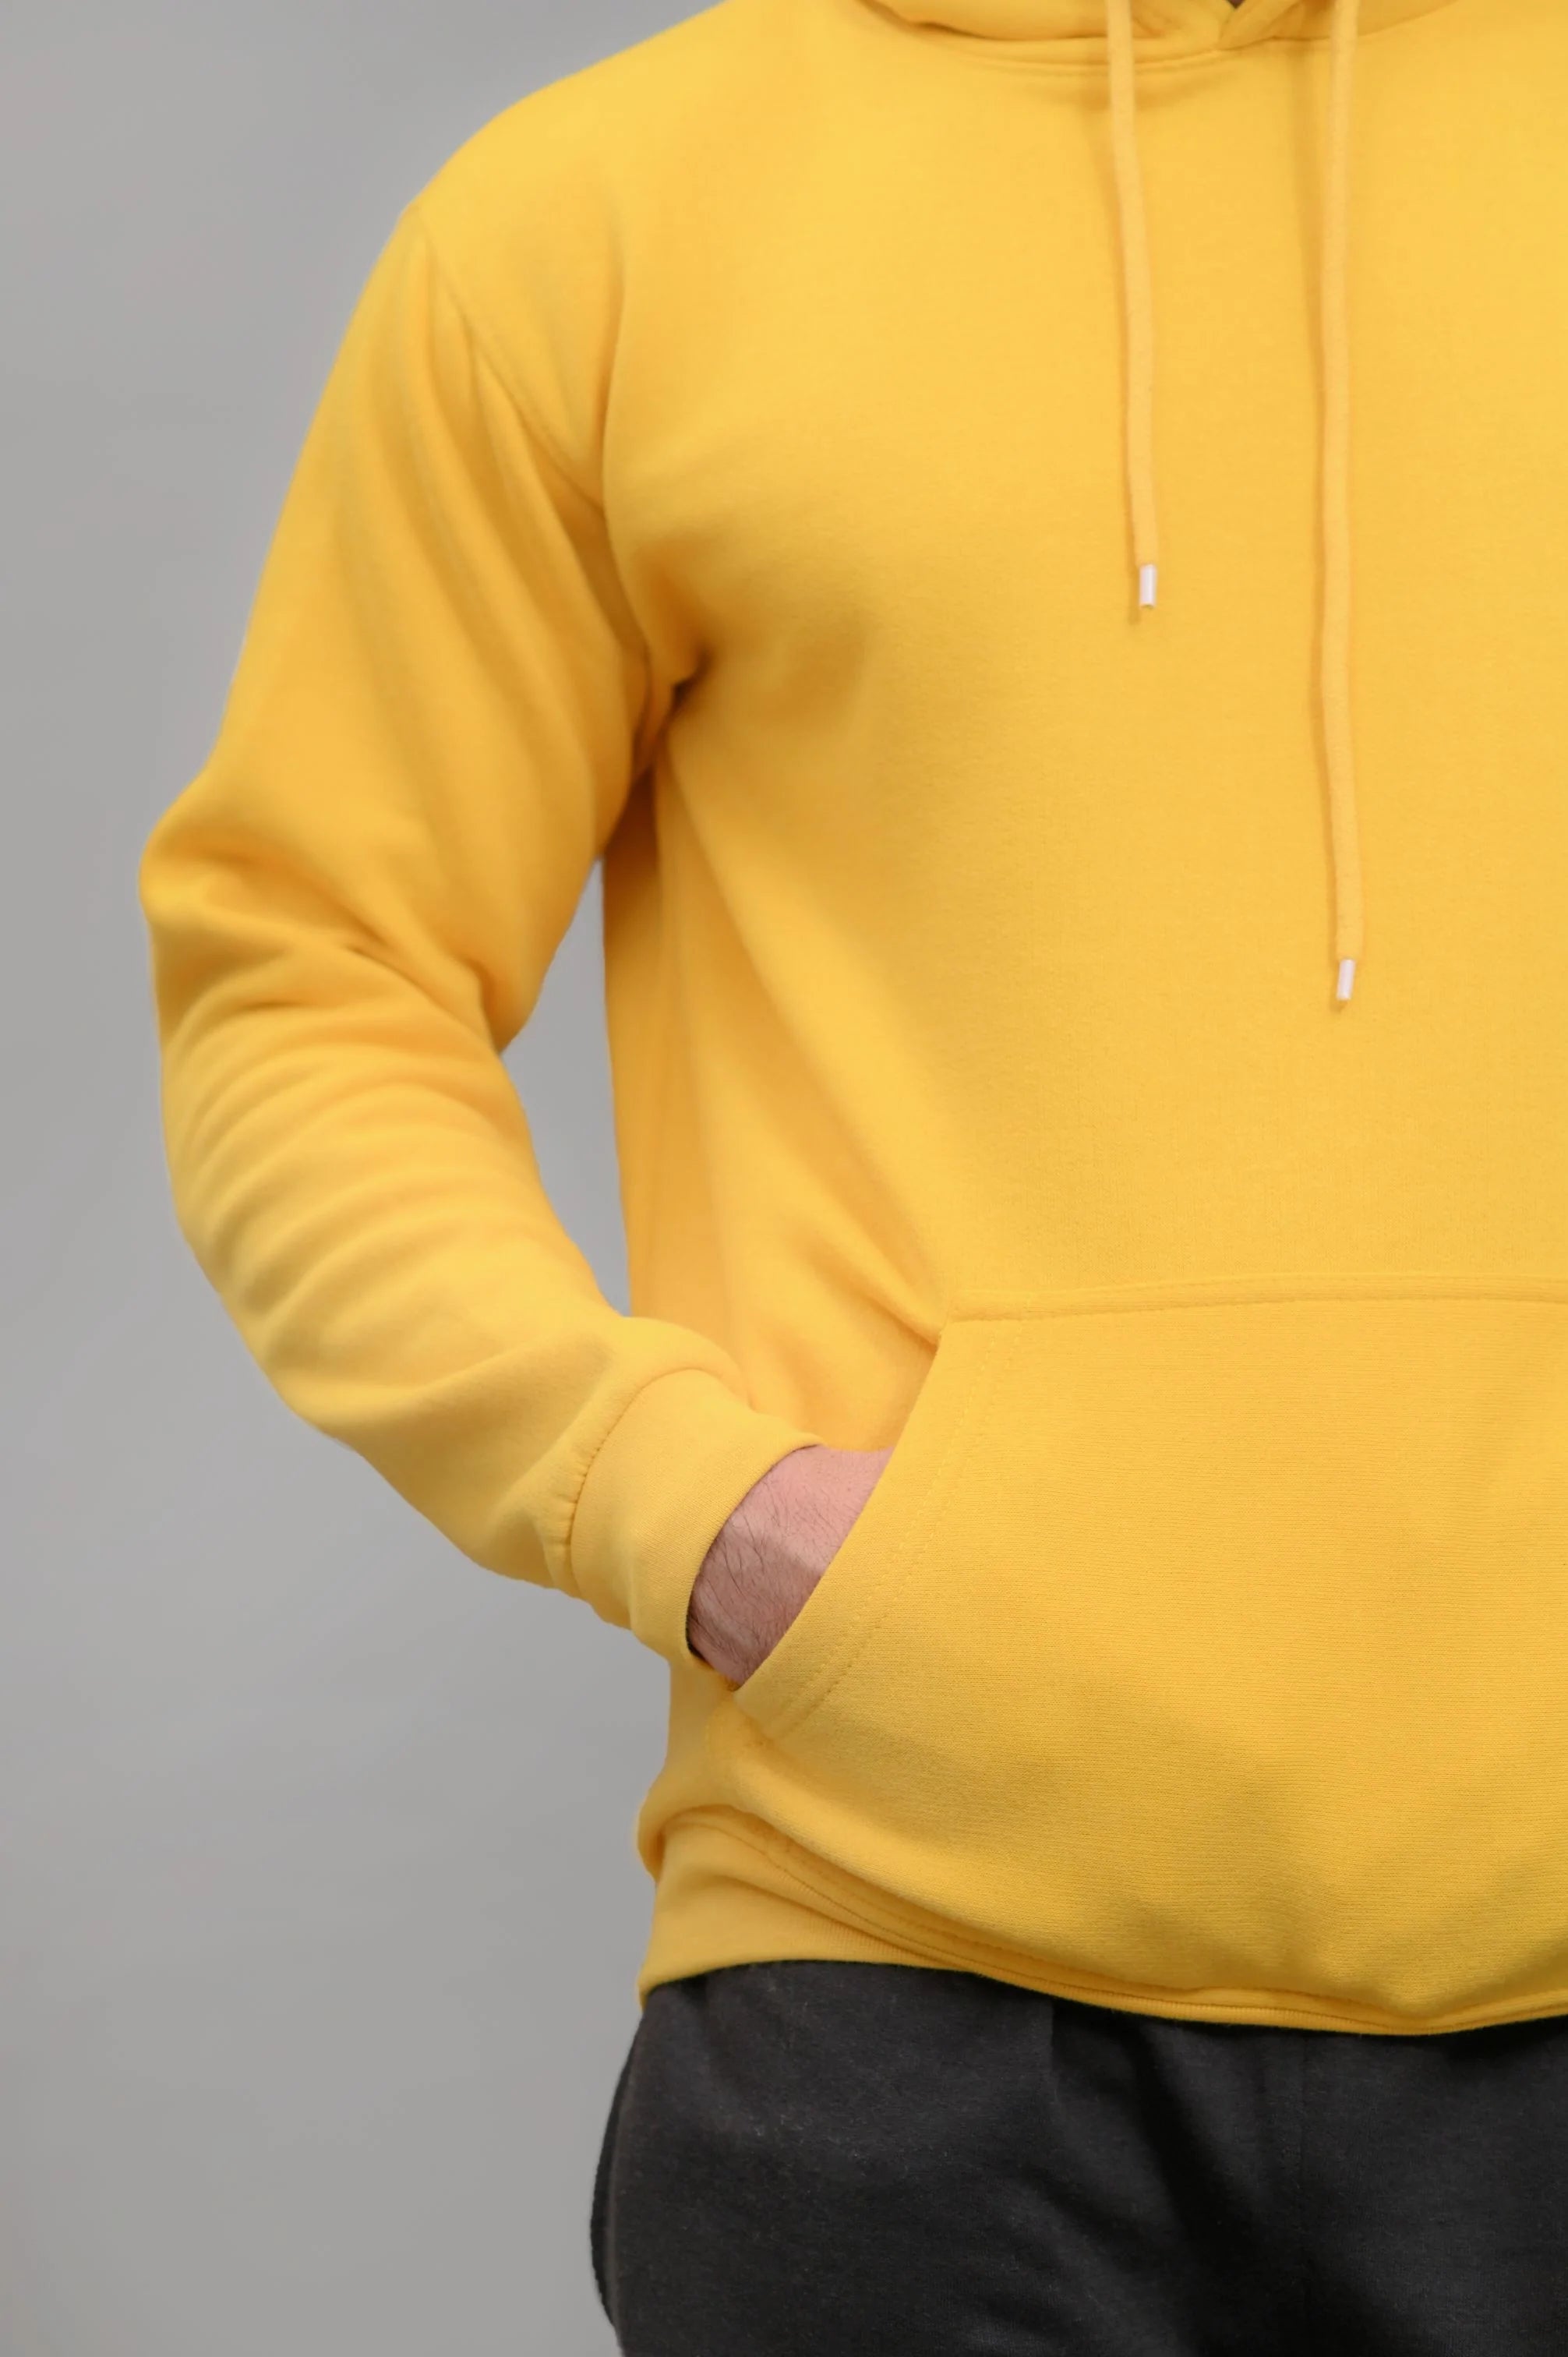 Yellow Basic Hoodie - UNISEX - Shop Now - Checkmate Atelier